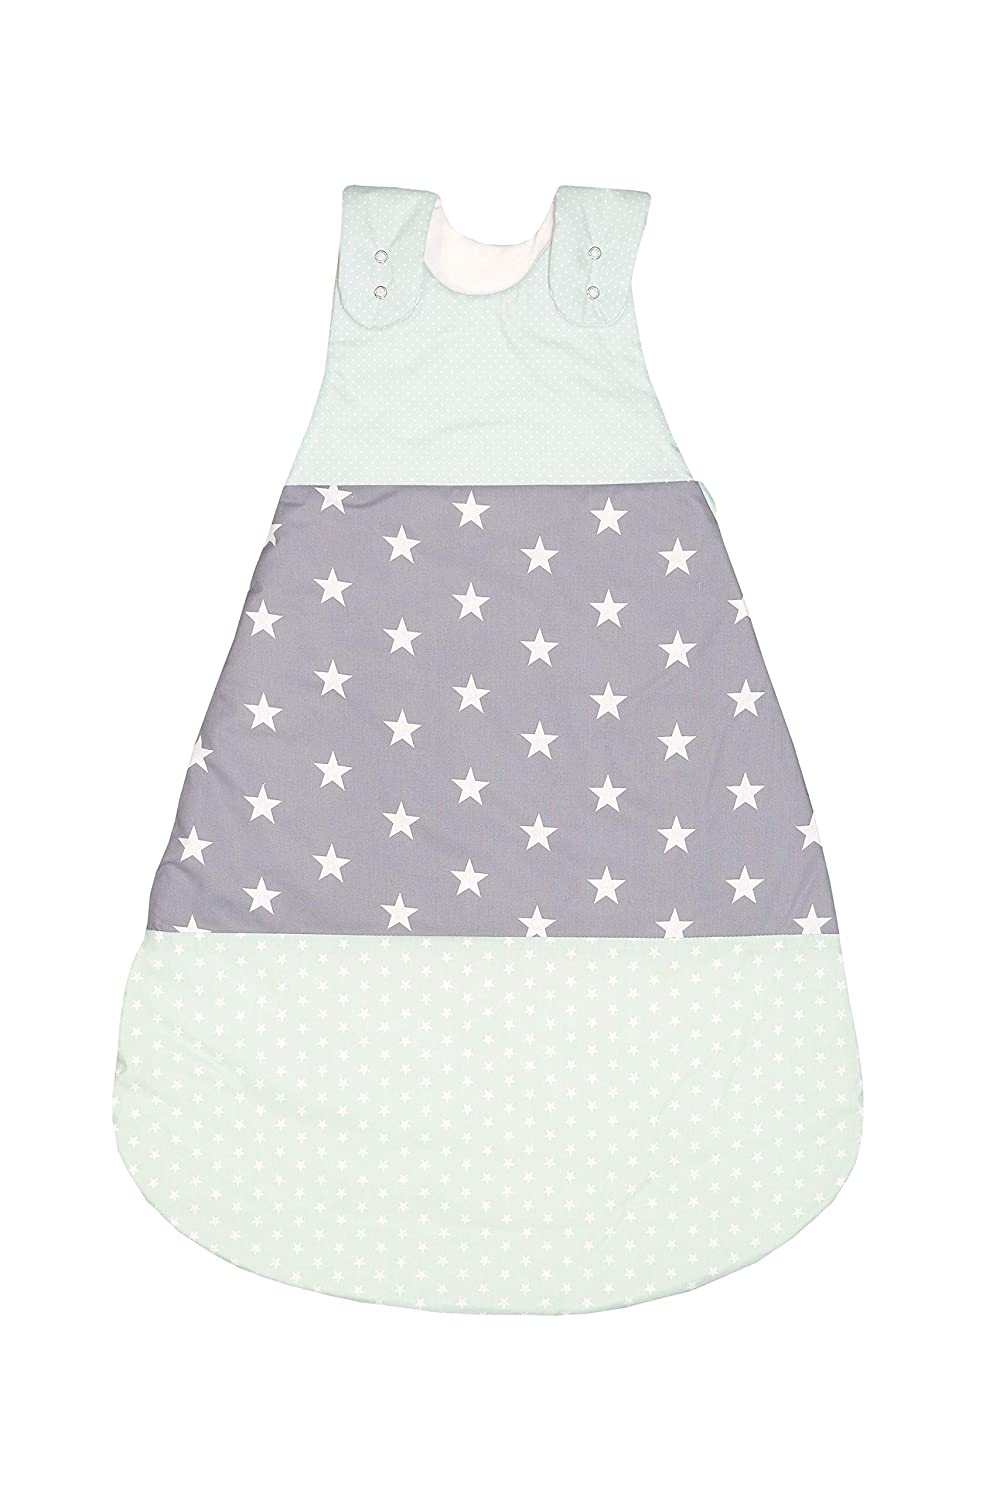 ULLENBOOM® Baby Sleeping Bag, 0 to 18 Months, Sizes: 56 / 62 / 68 / 74 / 80 / 86 (Made in EU) - for Spring, Autumn and Winter, with Motif: Stars.